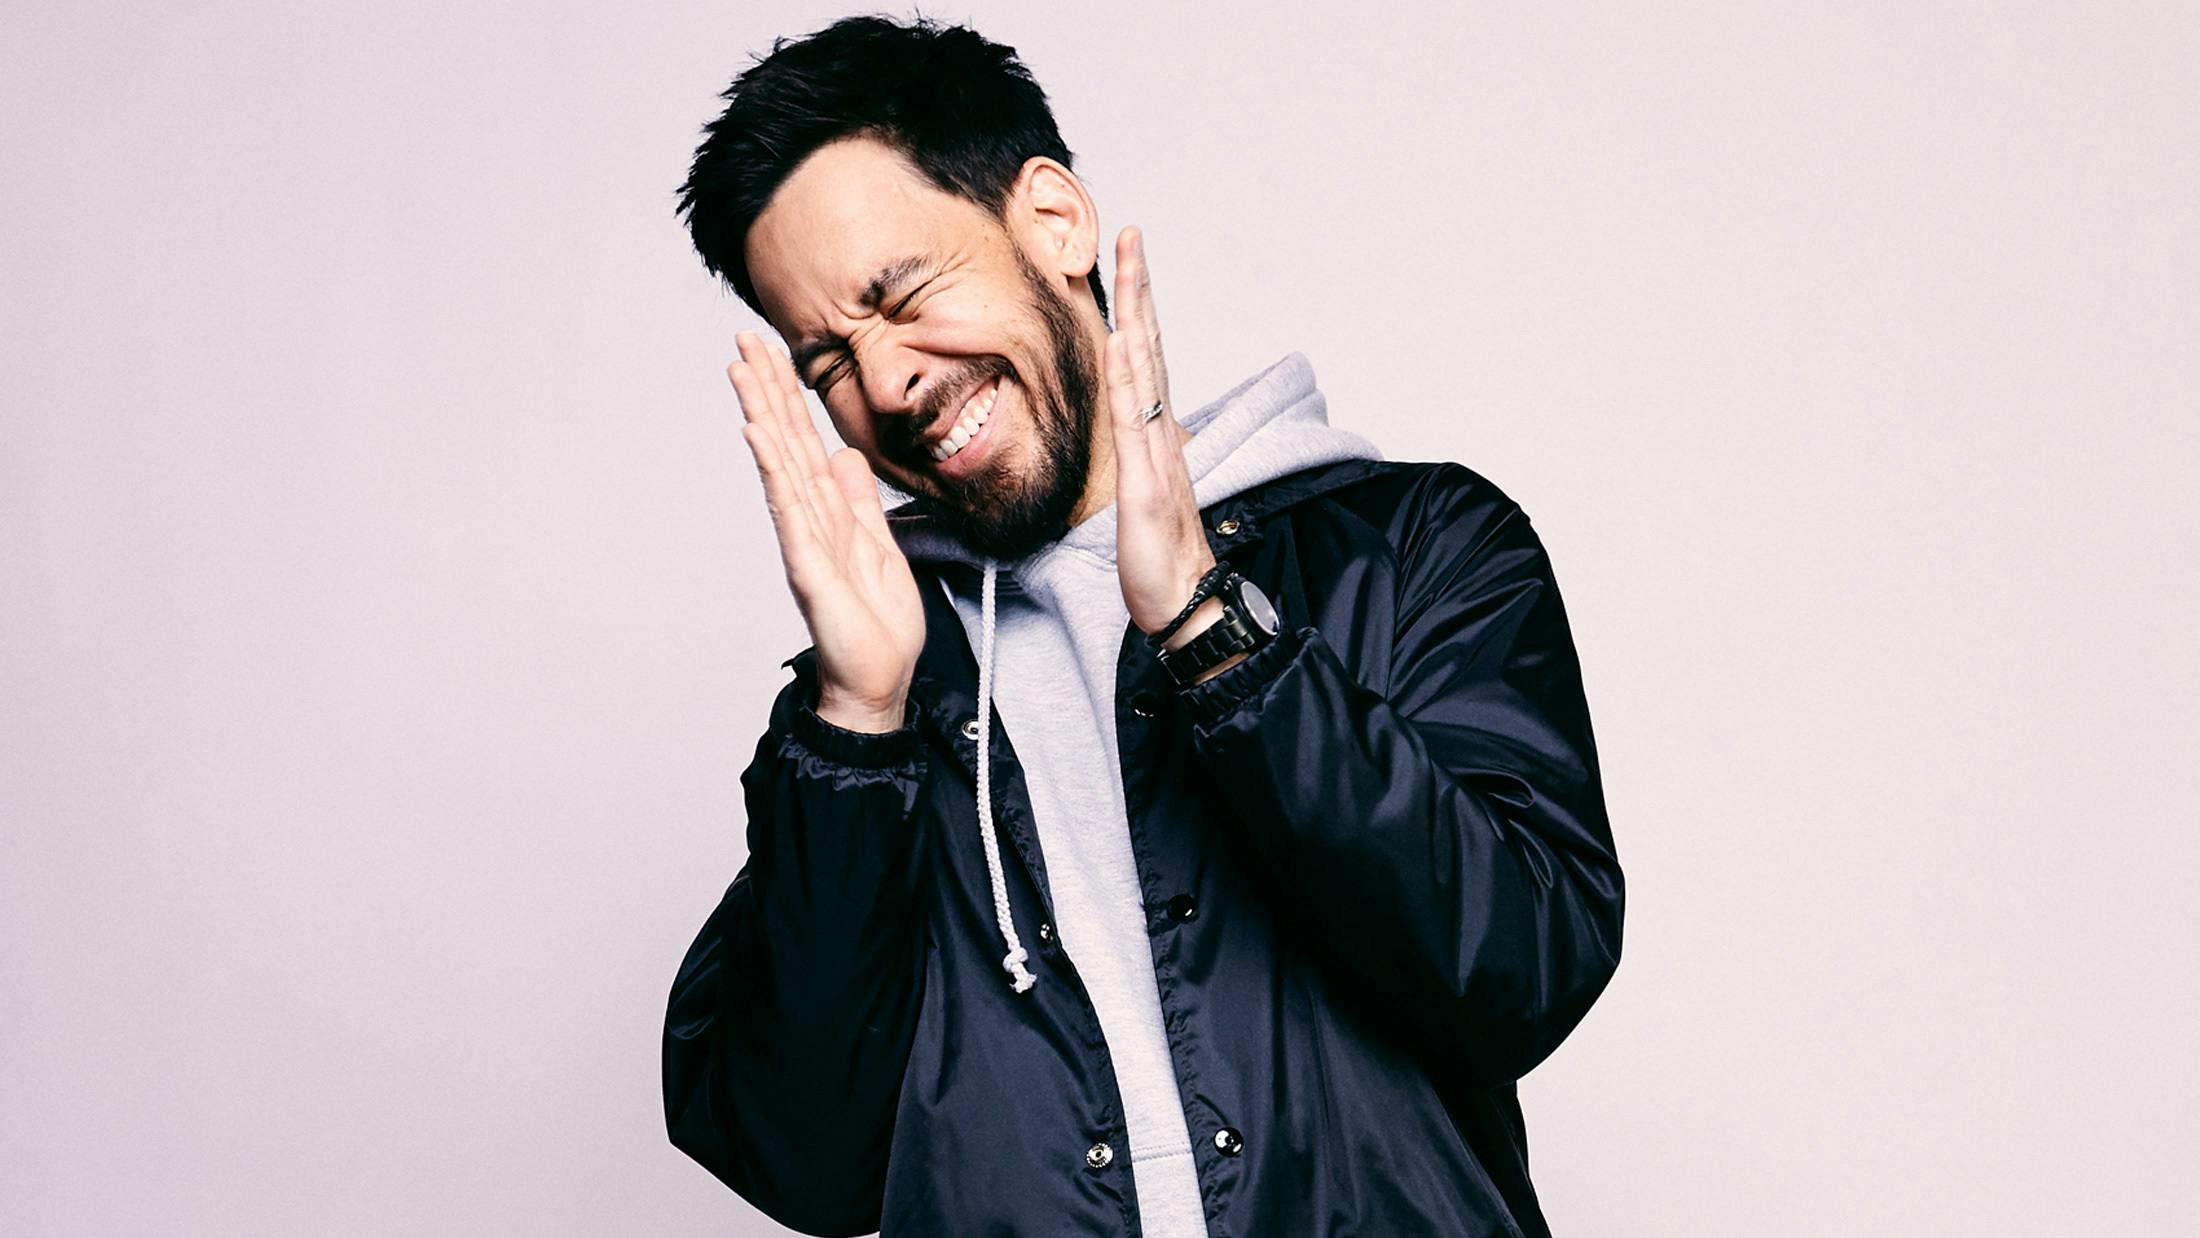 Mike Shinoda: "There’s Always Room For Hope, It Helps Us To Aspire To Do Better”